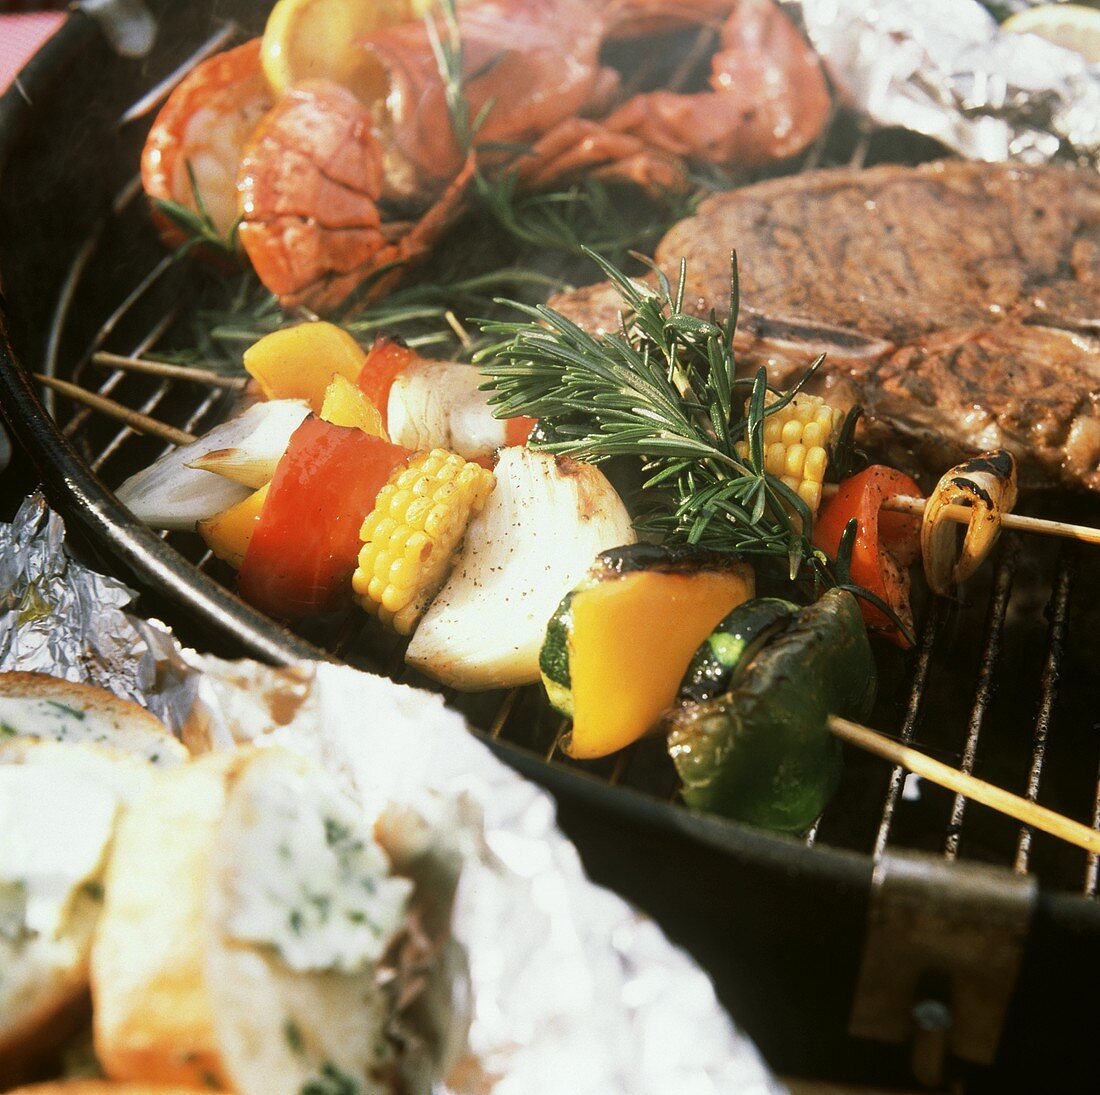 Skewered Vegetables on the Grille with Steak and Lobster